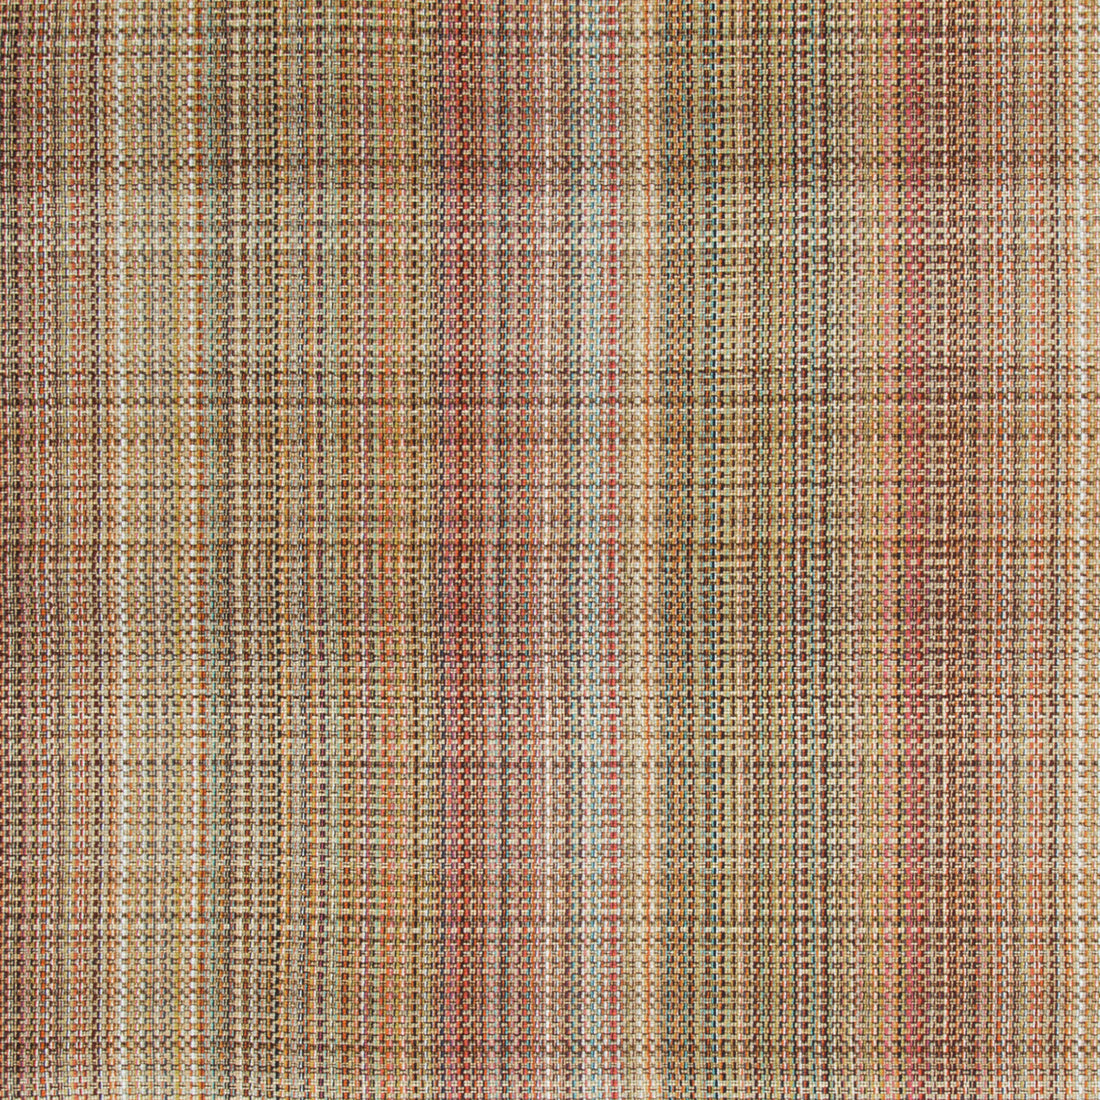 Tailor Made fabric in multi color - pattern 34932.1612.0 - by Kravet Couture in the Modern Tailor collection